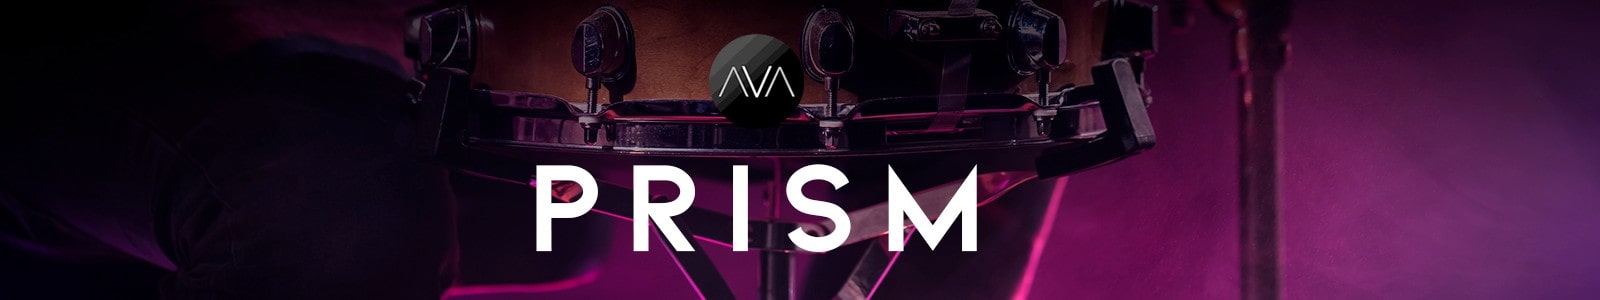 AVA Music Group PRISM